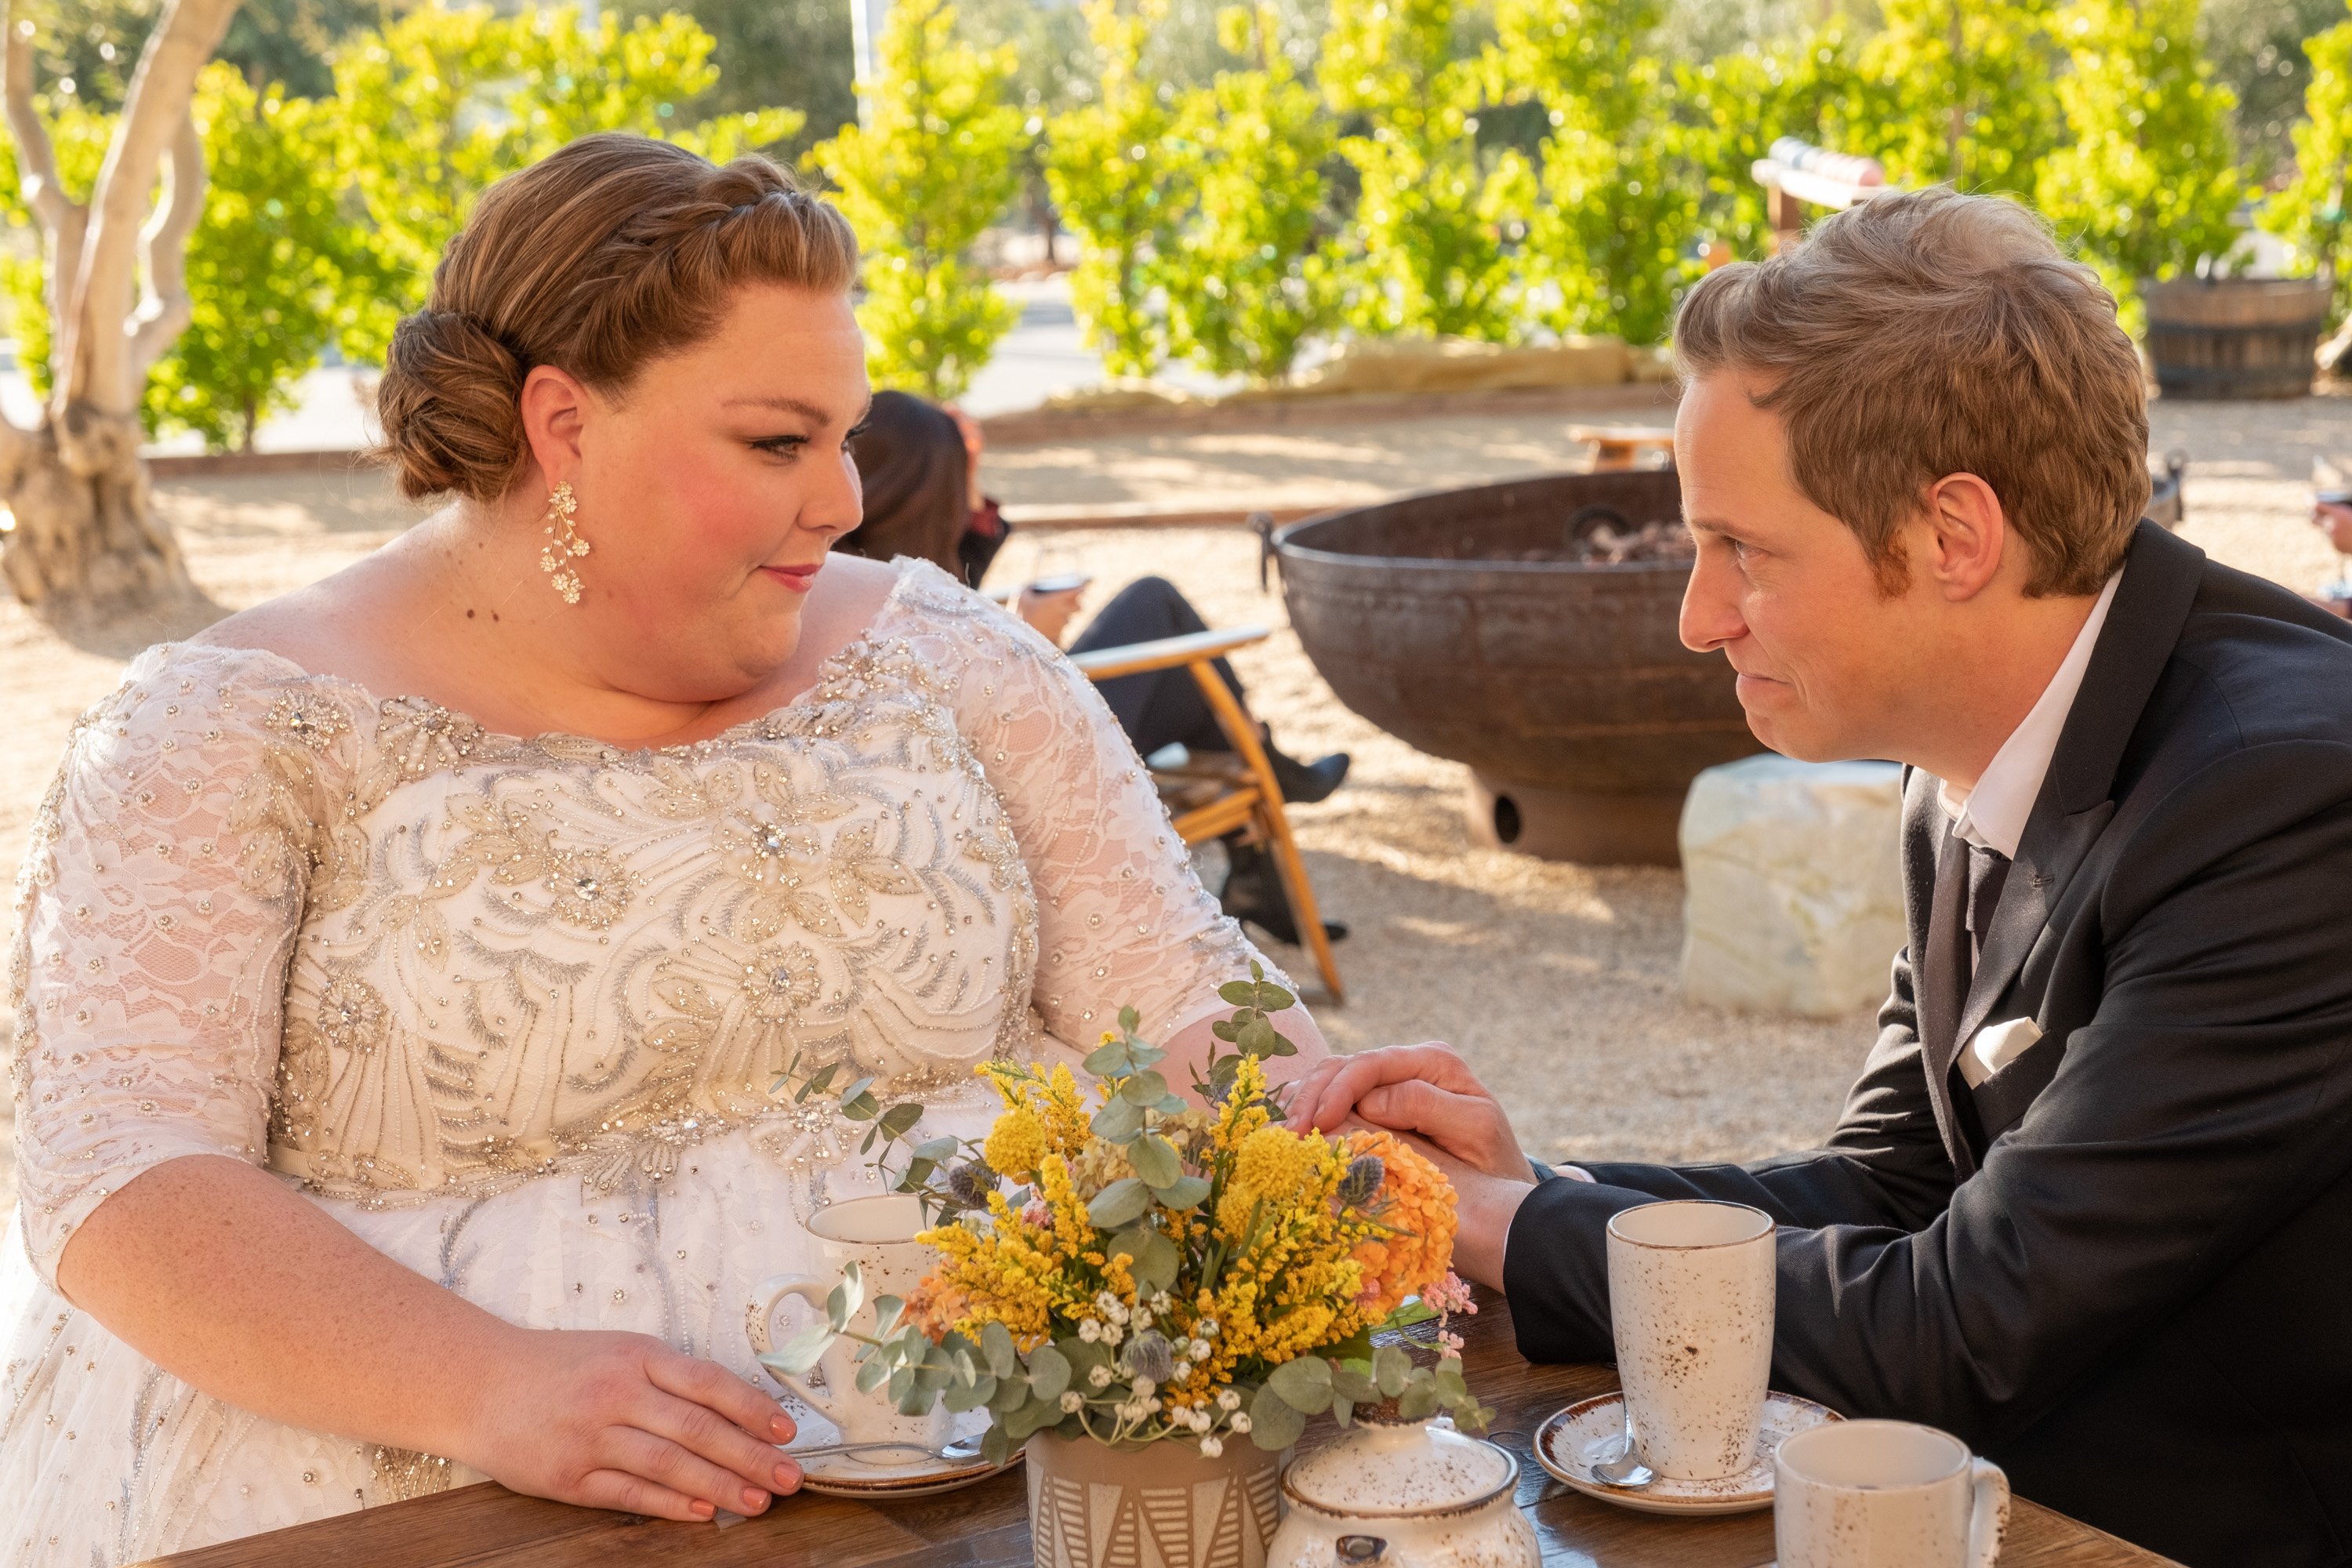 Chrissy Metz and Chris Geere, in character as Kate and Phillip in 'This Is Us' Season 6, share a scene on their wedding day. Kate wears a sparkly white wedding dress. Phillip, who is holding Kate's hand, wears a black suit.